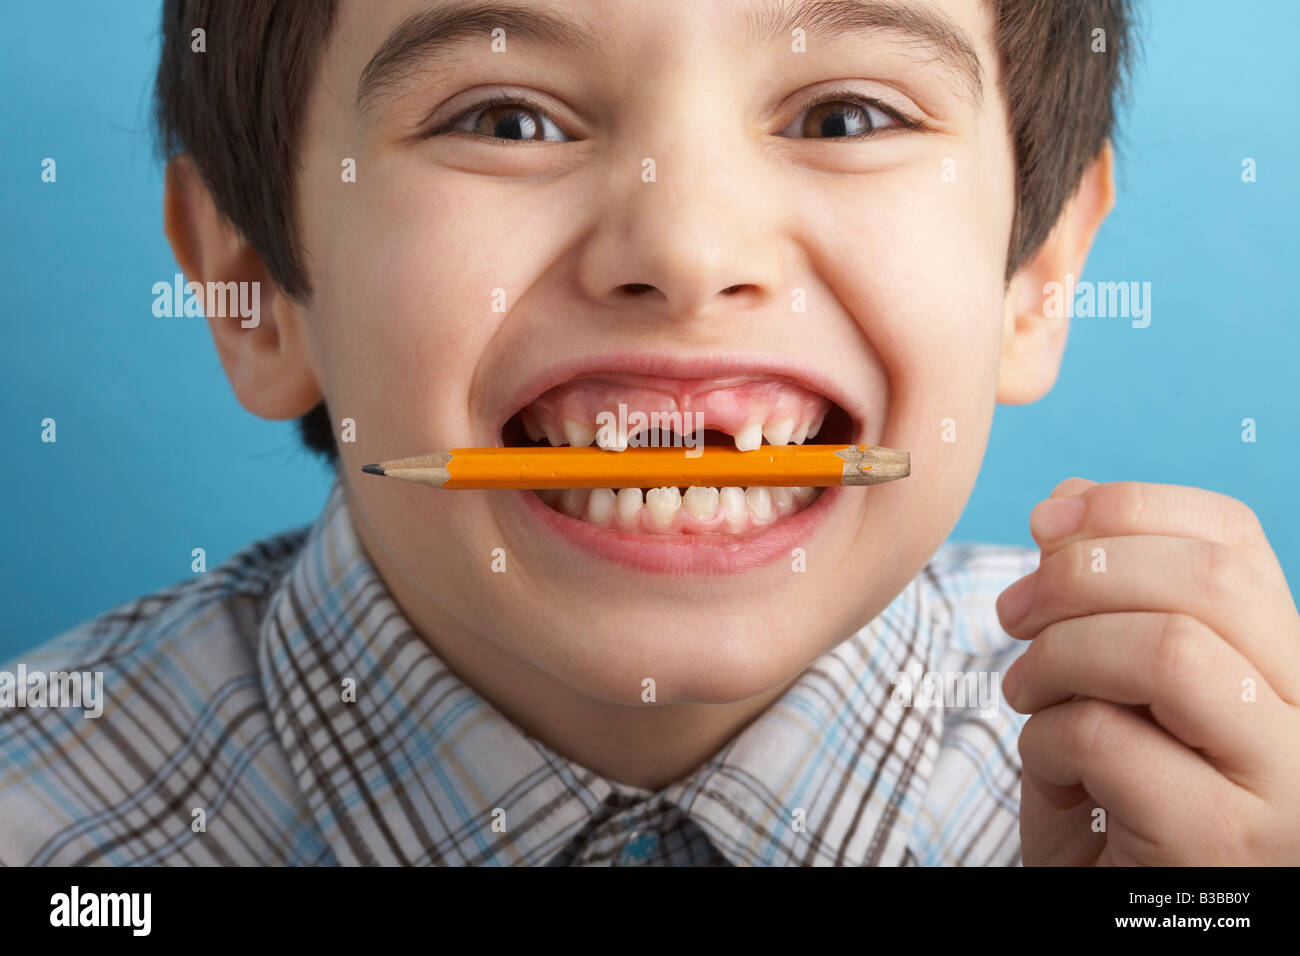 Portrait of Boy With Missing Teeth, Biting Pencil Stock Photo